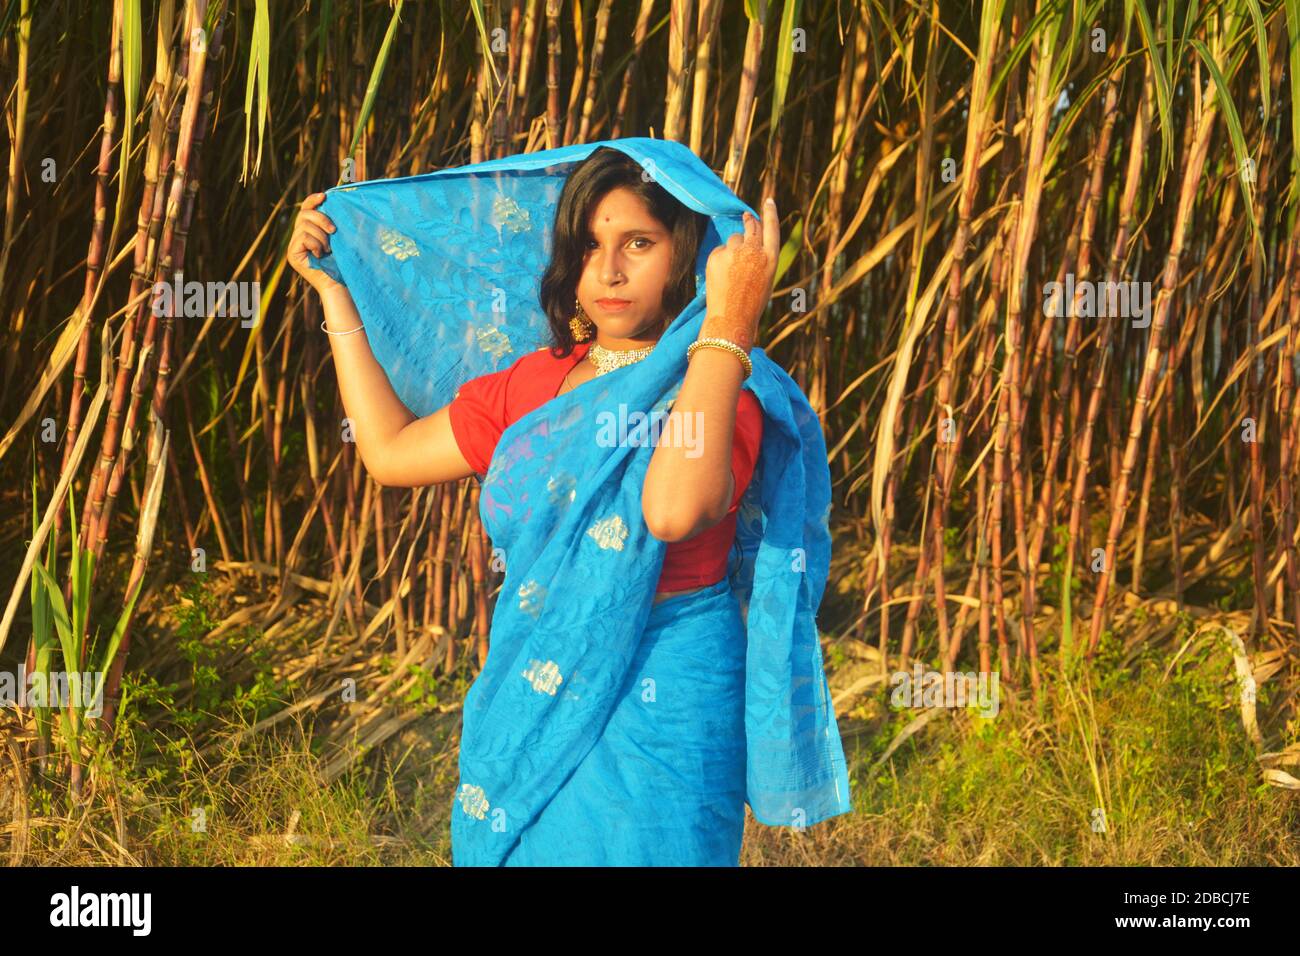 Teenage girl wearing blue saree and red blouse with golden color earrings, necklace and dark hair holding sari over head standing  on  sugarcane field Stock Photo